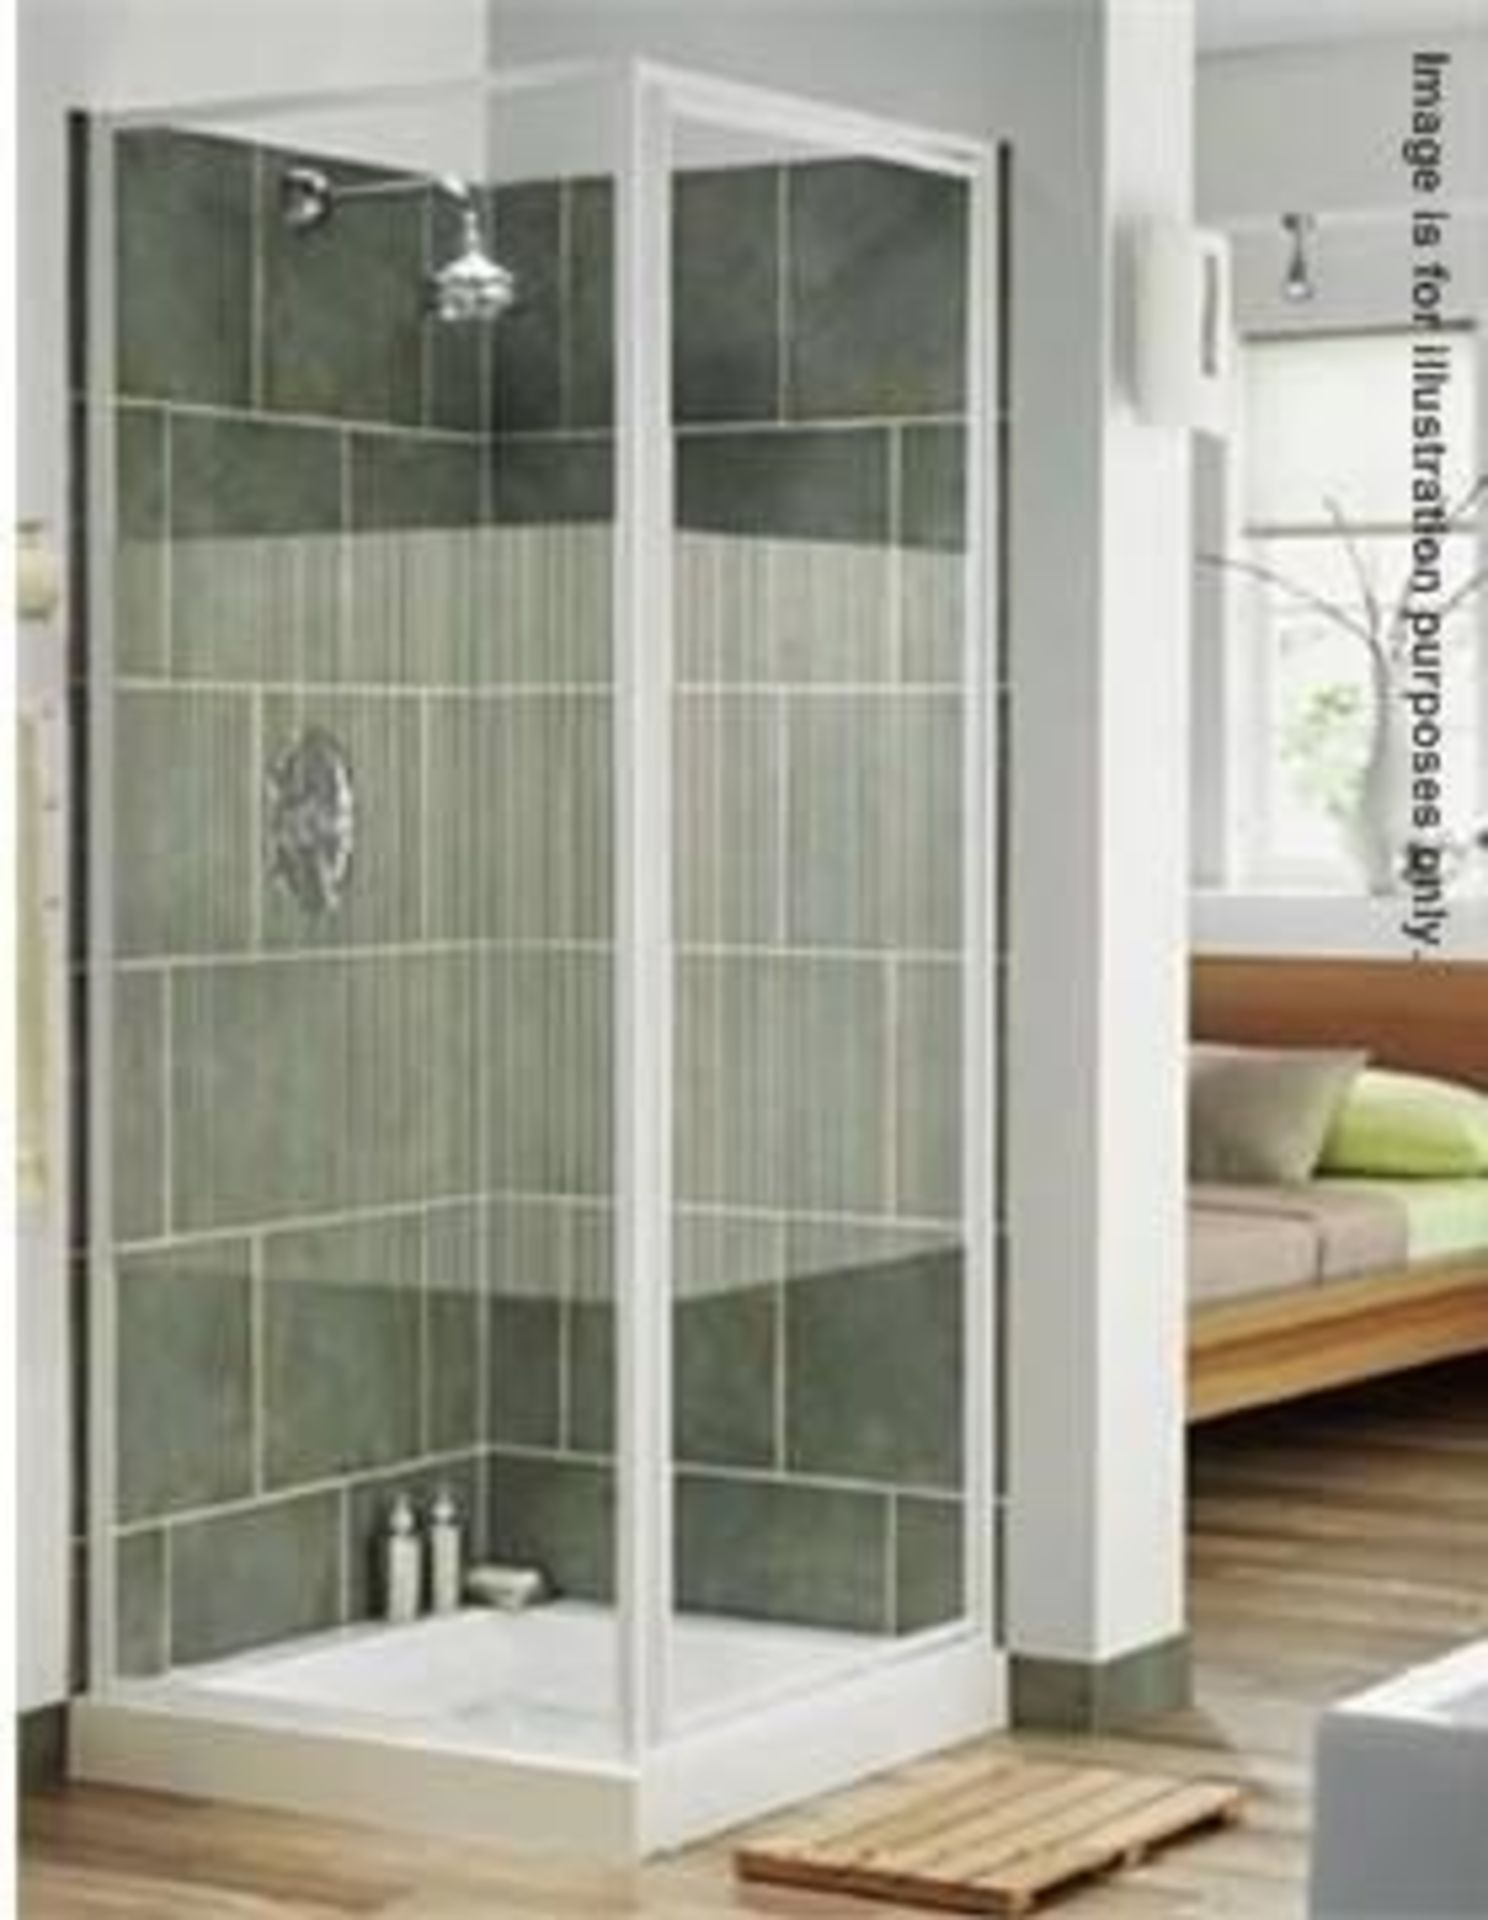 1 x Simpsons Supreme Pivot Shower Door With Side Panel - 600x600mm - RRP Approx £600